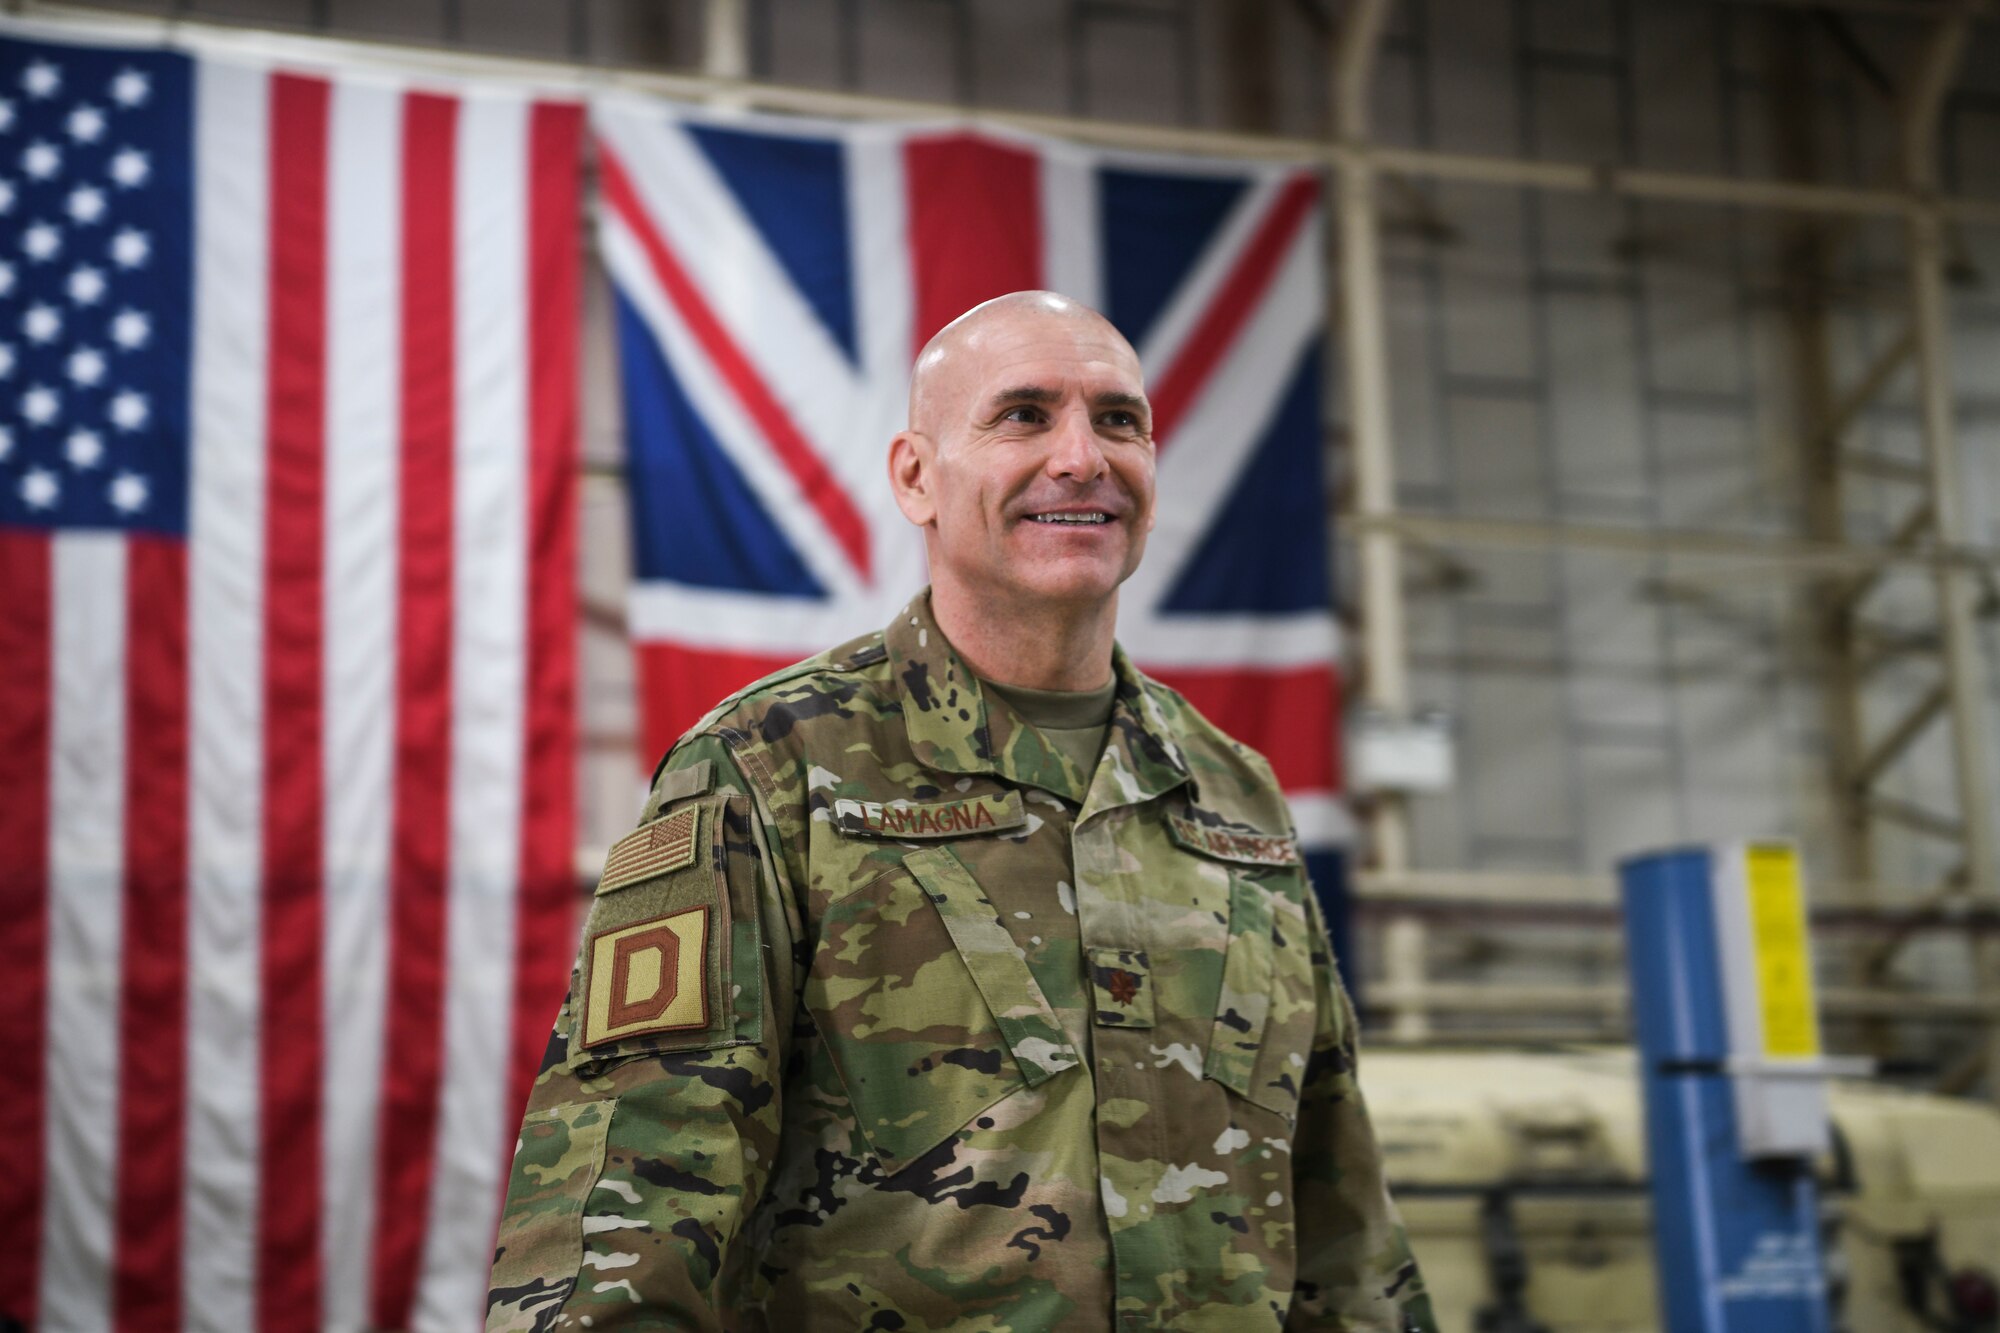 U.S. Air Force Maj. Anthony LaMagna, 100th Logistics Readiness Squadron commander, poses for a photo at RAF Mildenhall, England, May 2, 2019. LaMagna has had his fair number of trials and tribulations. From coming in as an older Airman to losing family members; he overcame personal barriers and struggles throughout his career to fulfill his goal of commissioning. (U.S. Air Force photo by Senior Airman Alexandria Lee)